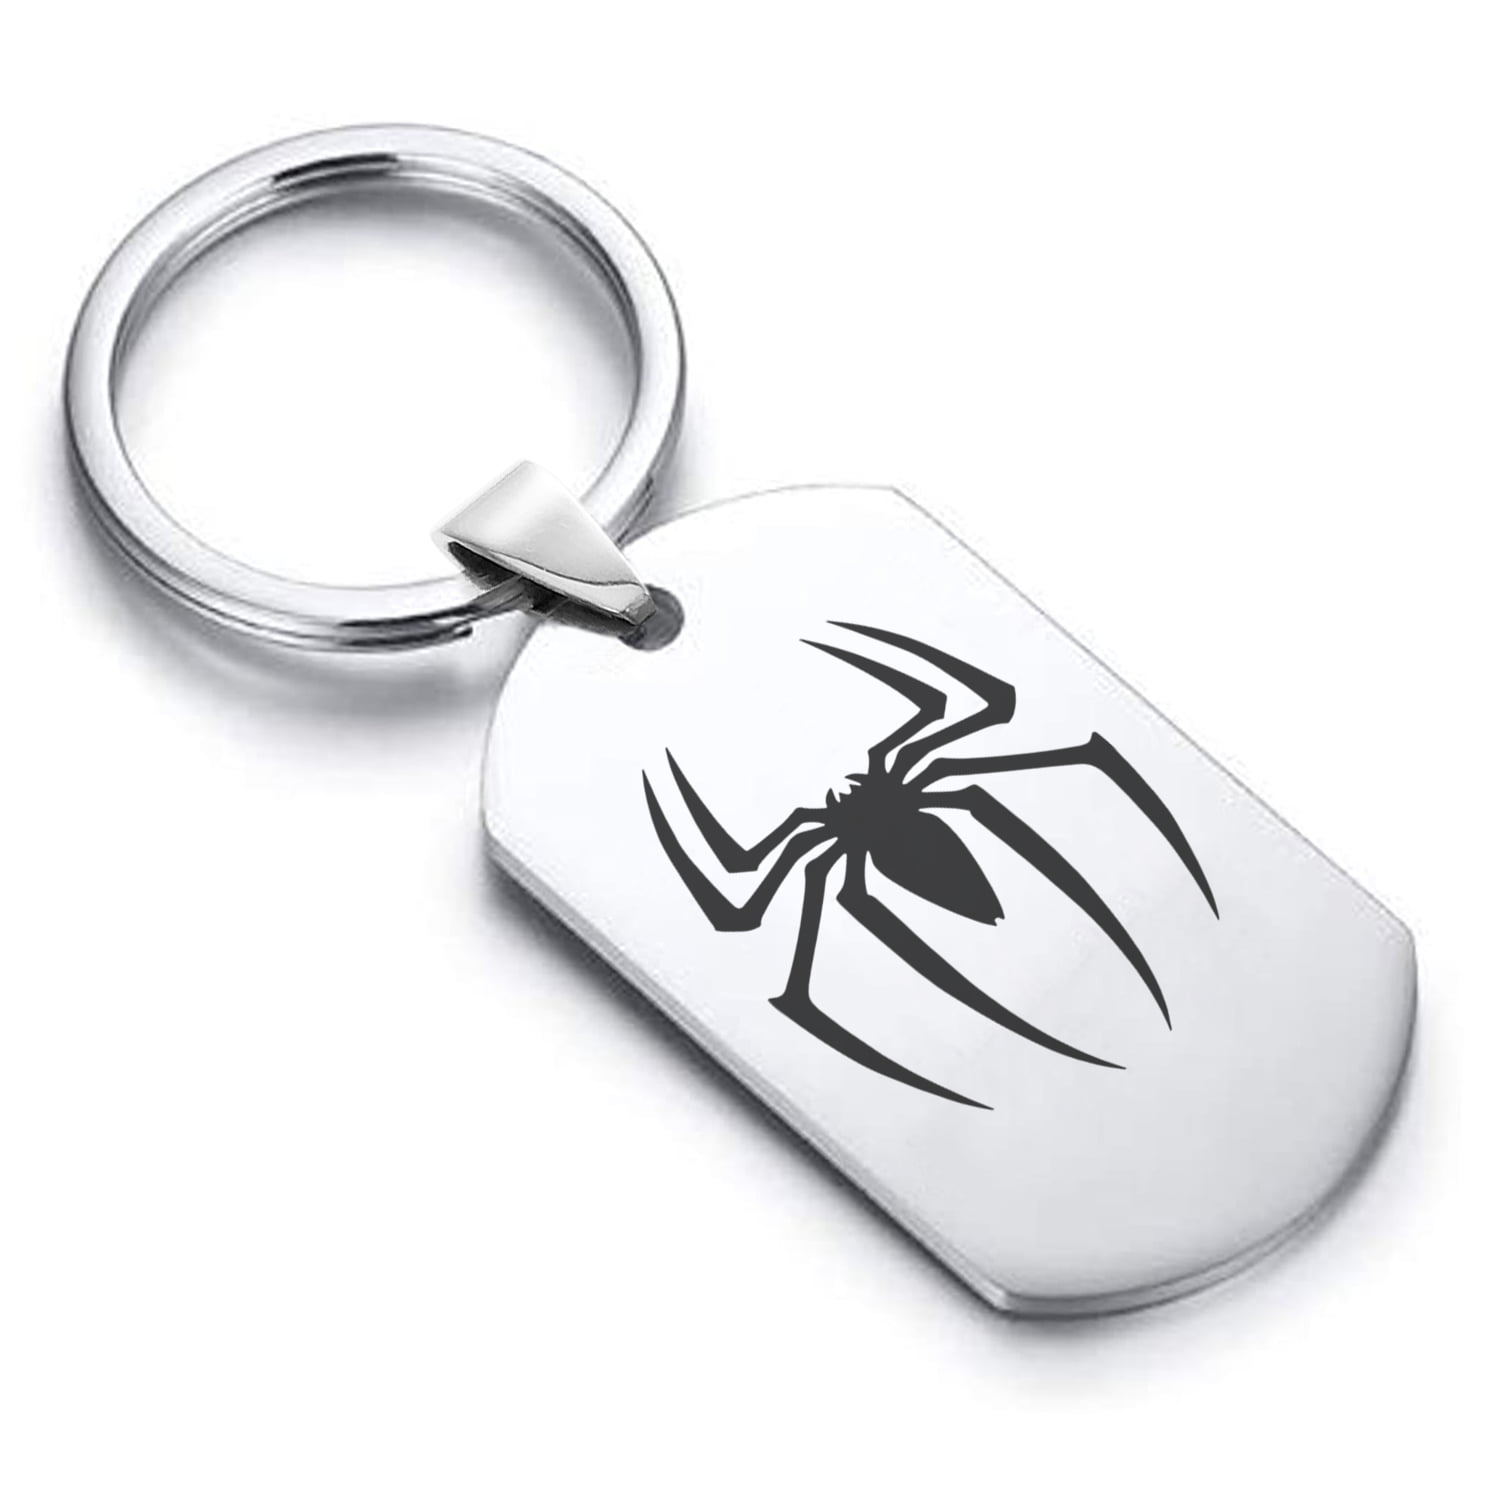 Stainless Steel Spider-Man Dog Tag Keychain Circle Ring - Walmart.com